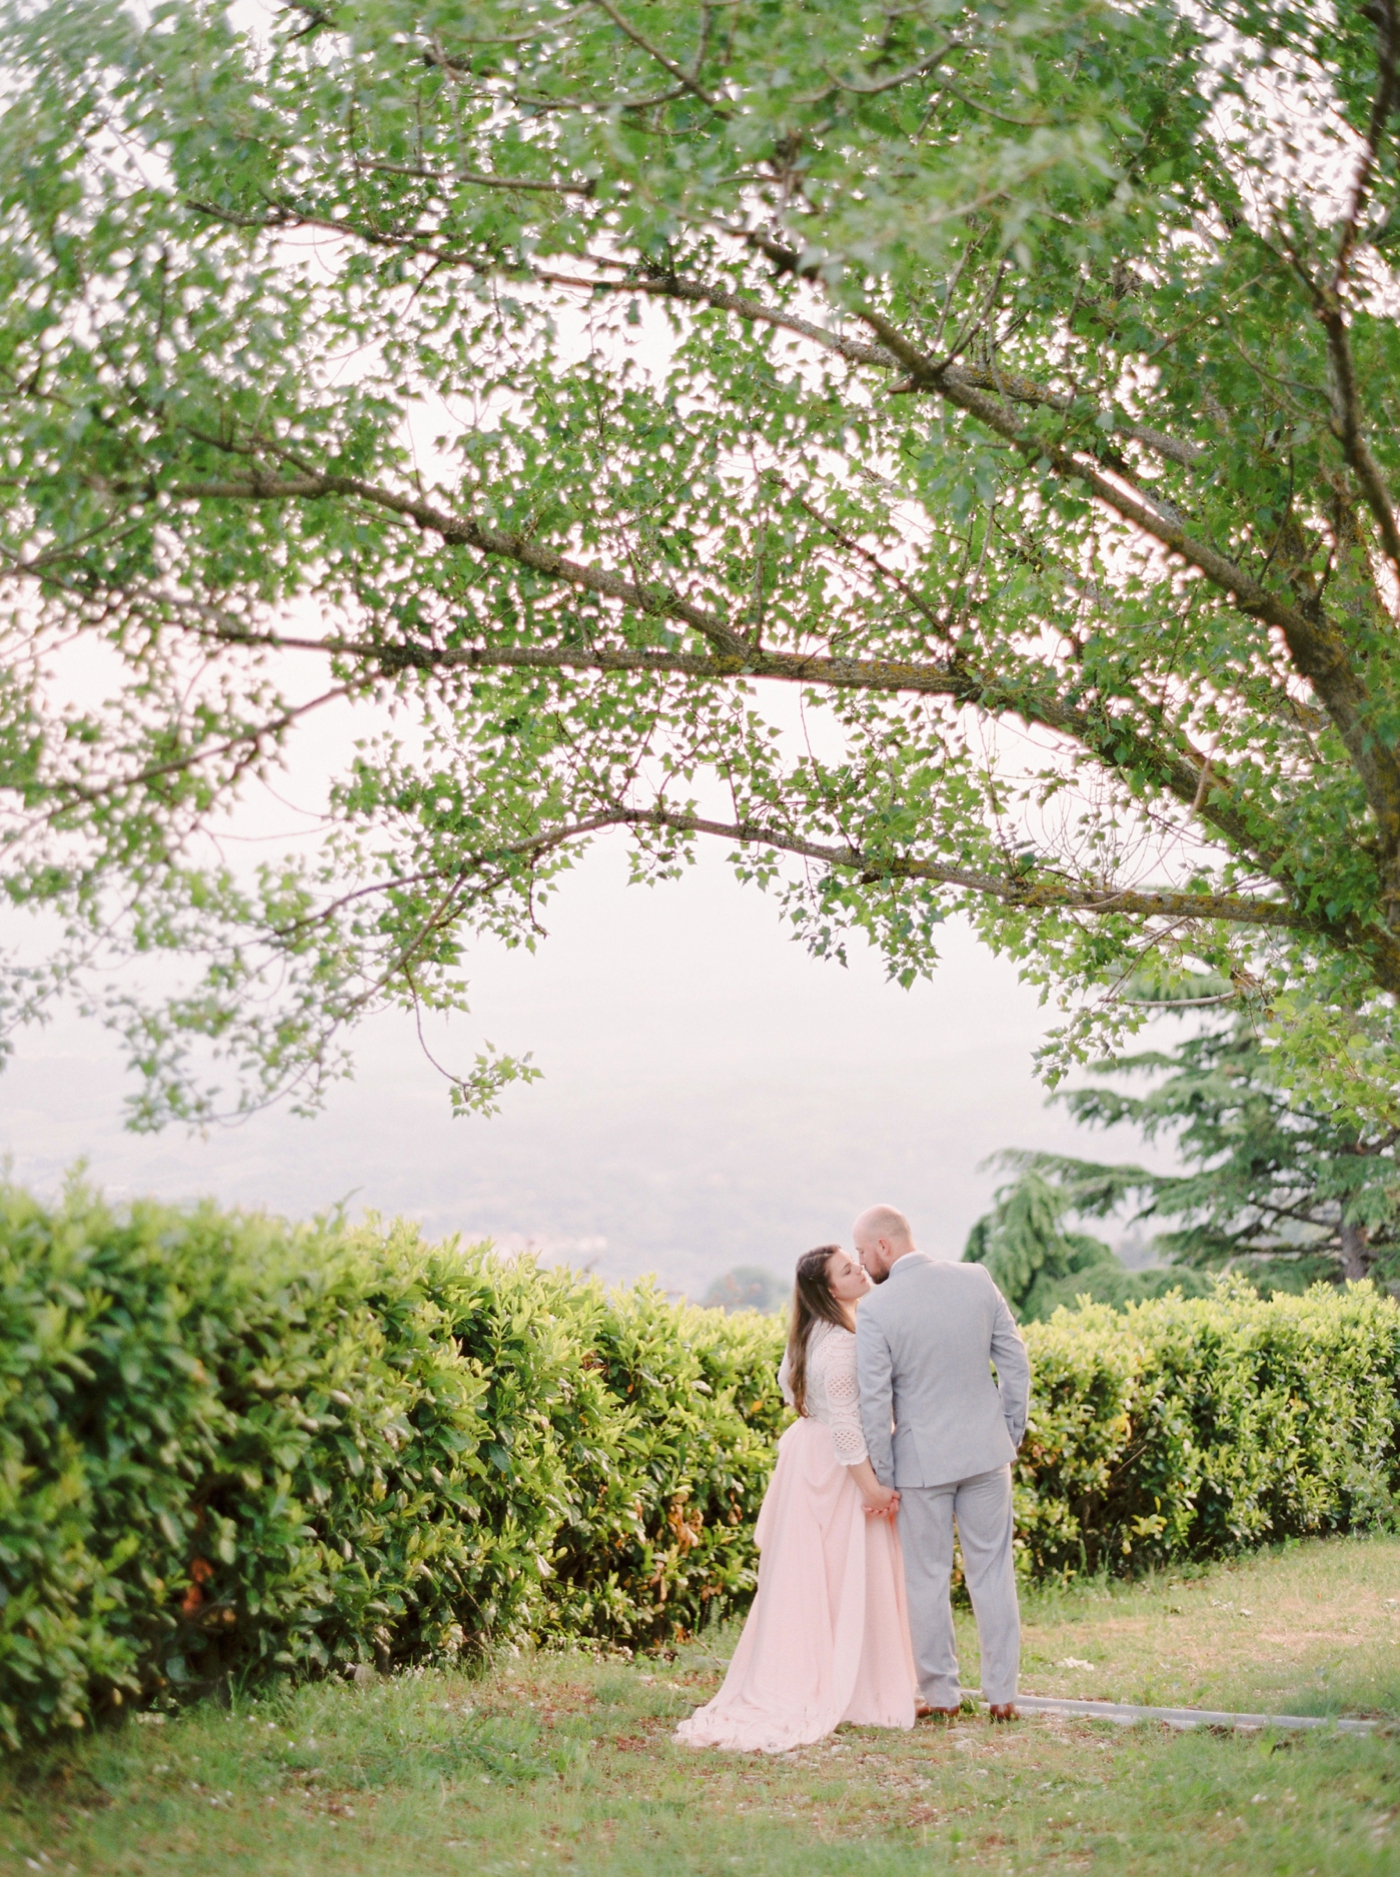 tuscany wedding photographers | bride and groom in a tuscan countryside | justine milton fine art film photographer